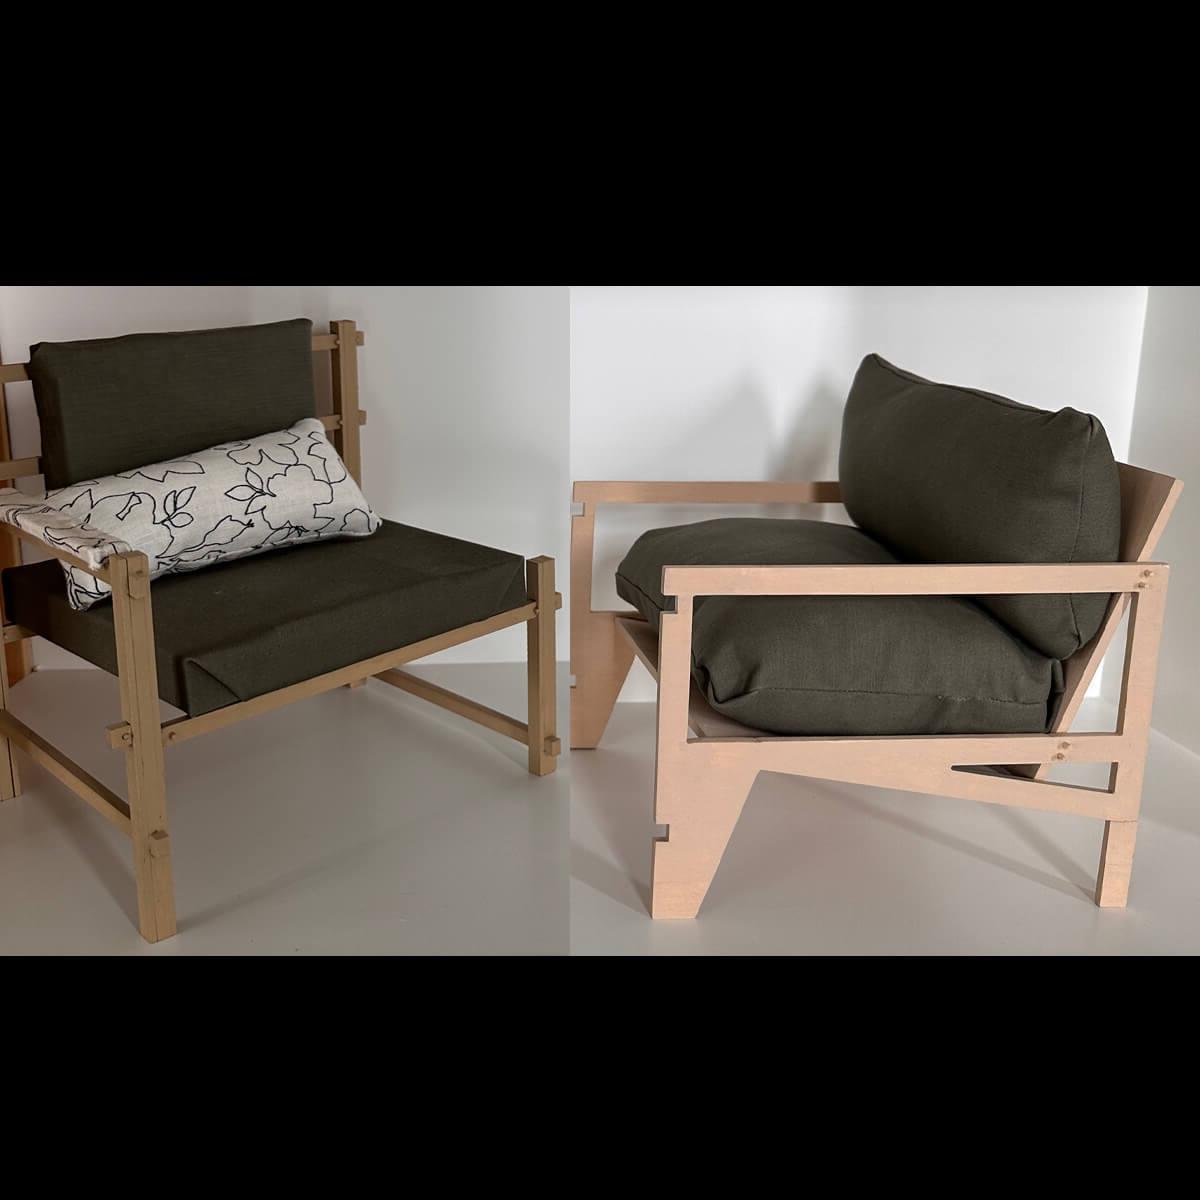 Two student chair designs